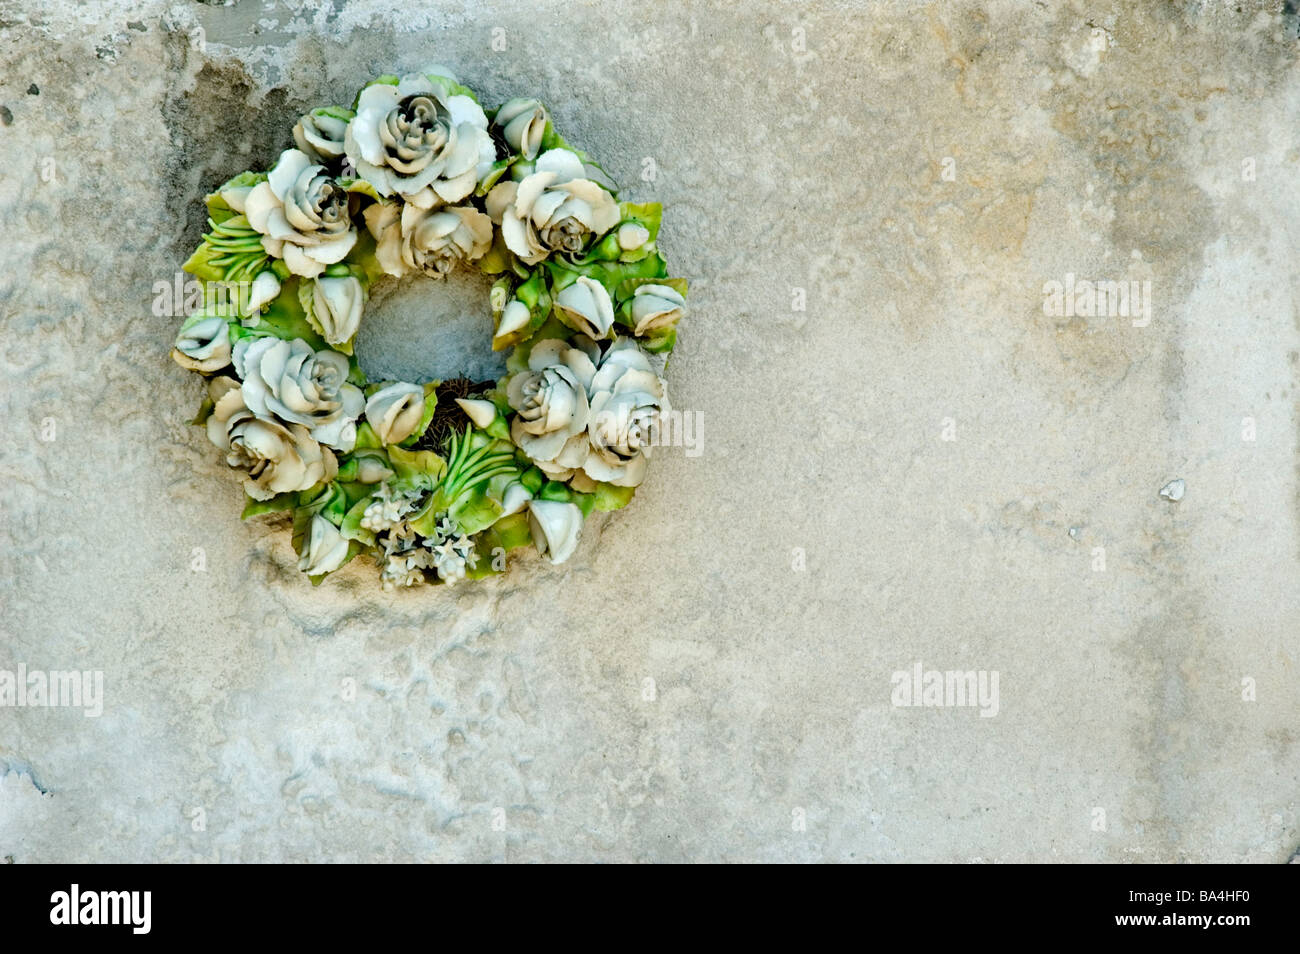 Memorial wreath in French cemetery. Stock Photo